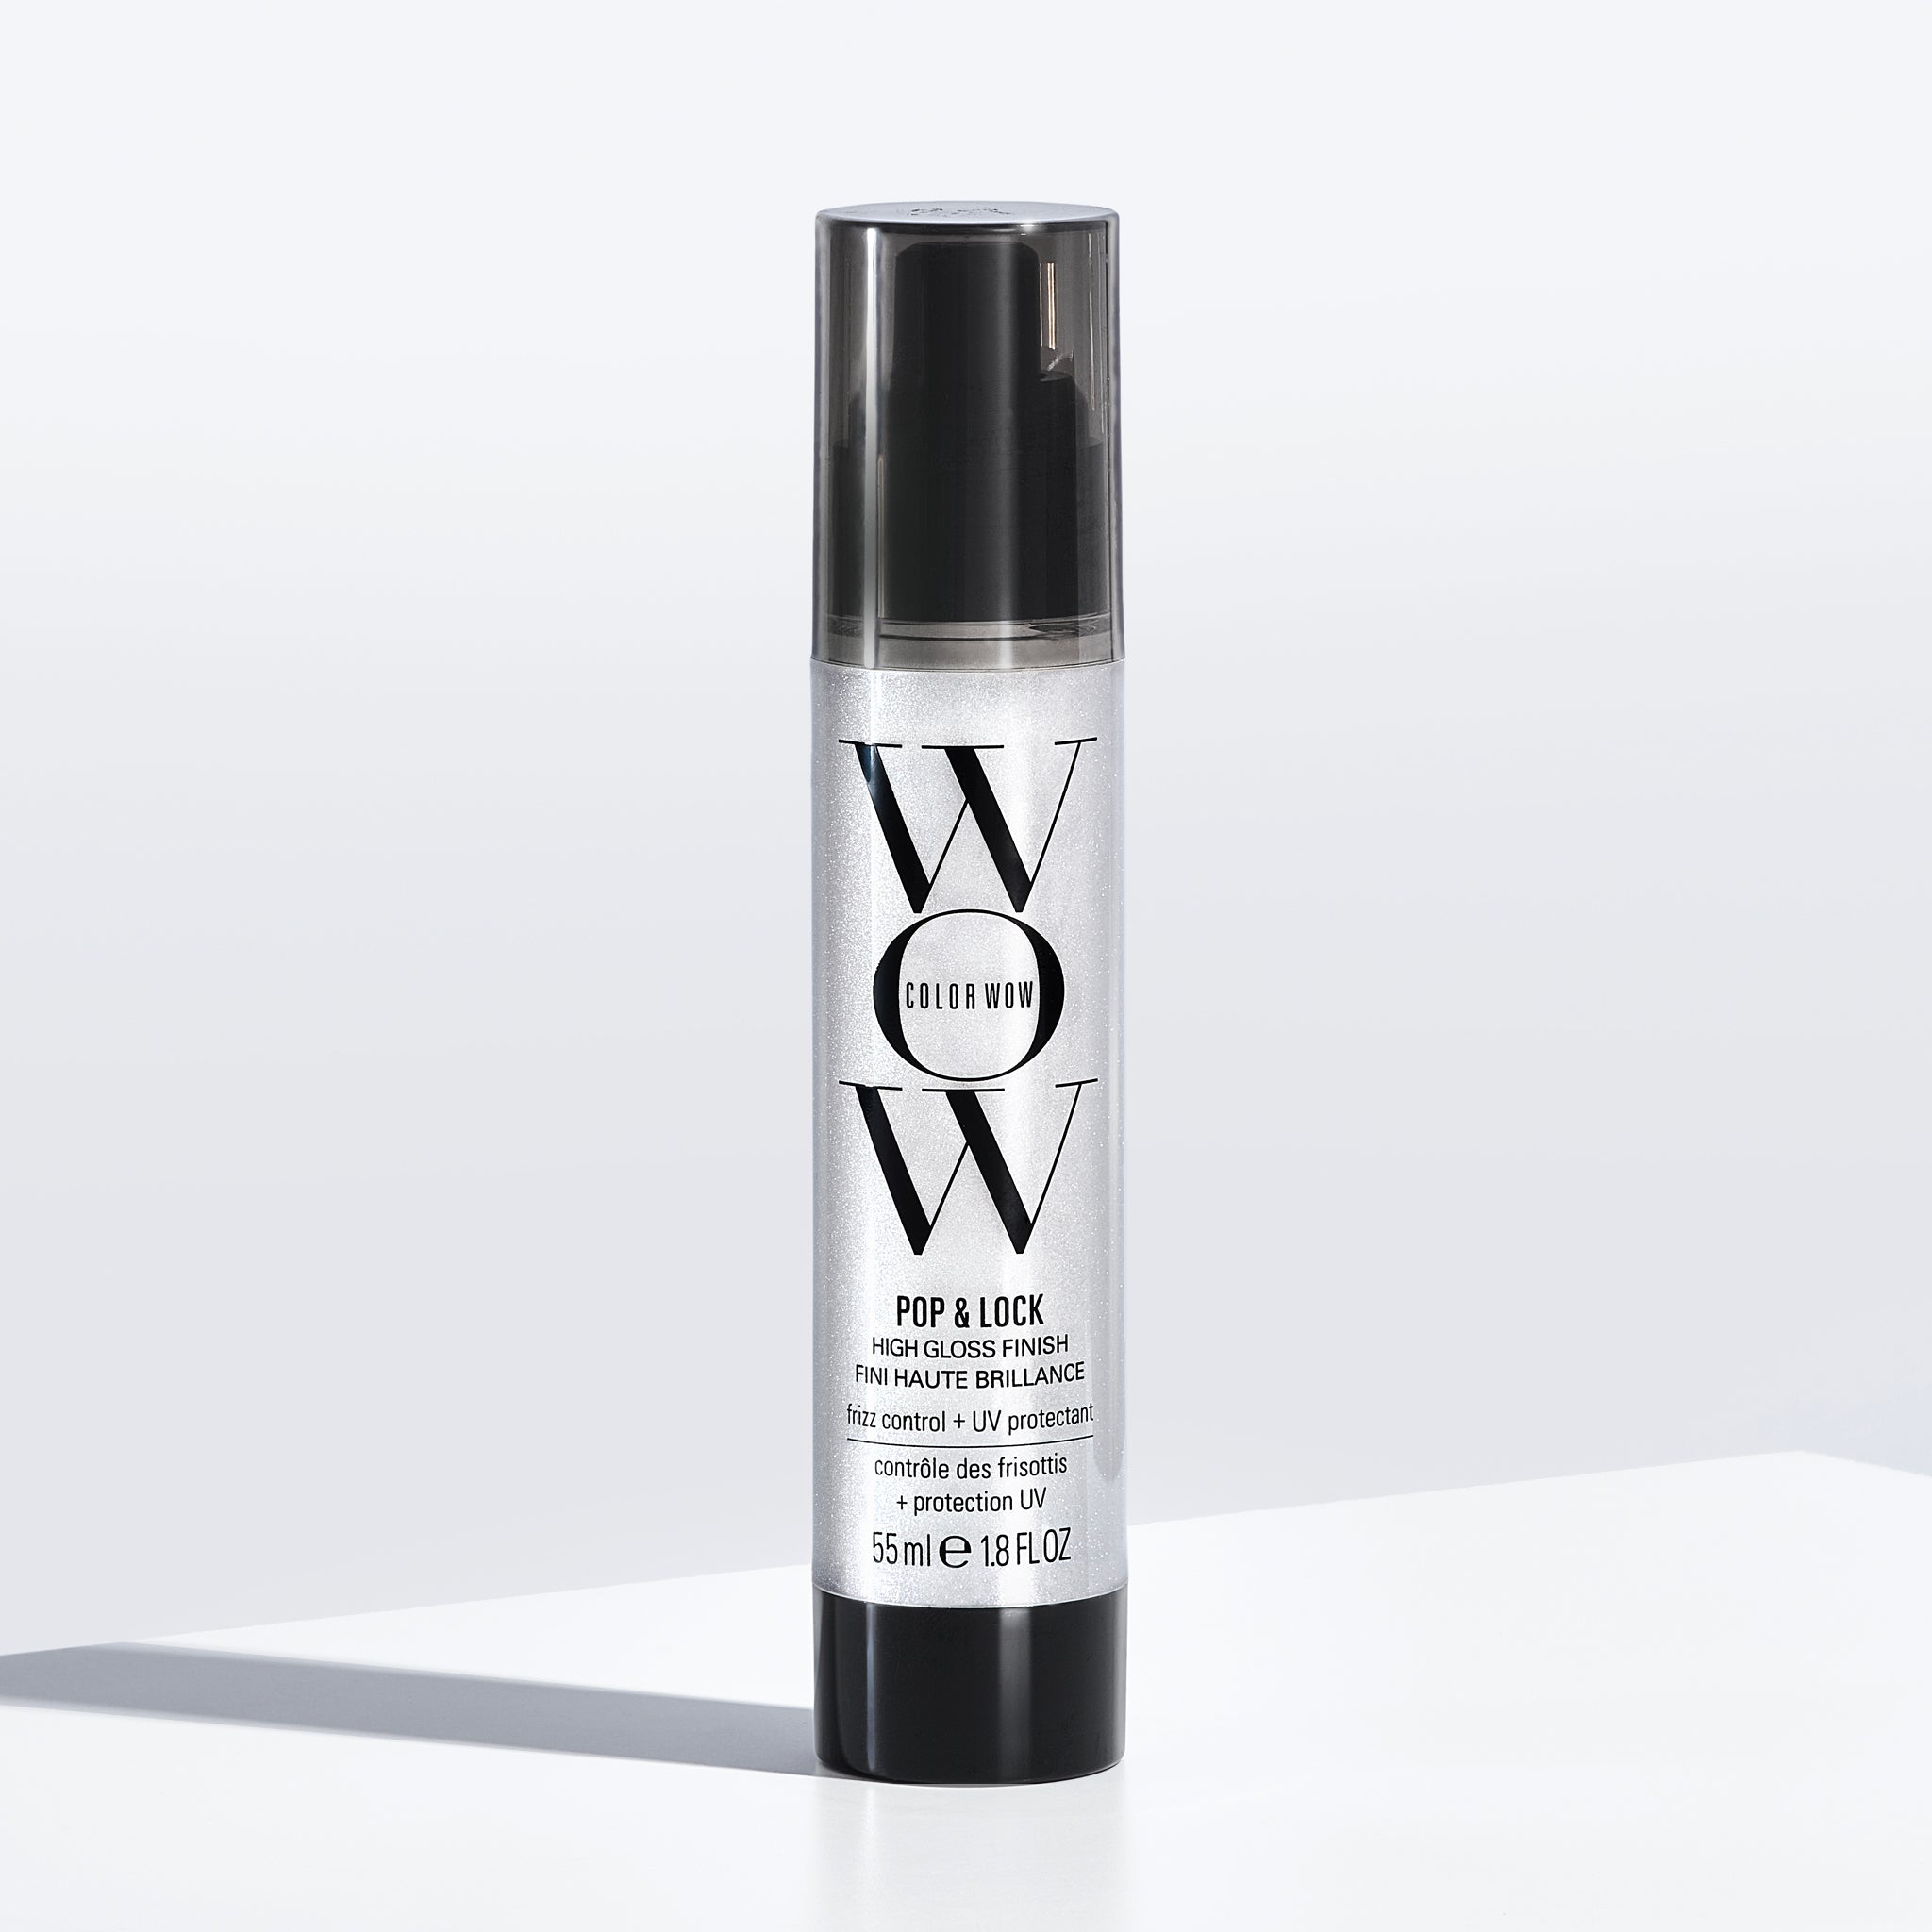 Indbildsk usikre Delegation Color Wow Pop and Lock Gloss Serum Creates Glossy, Silky Hair